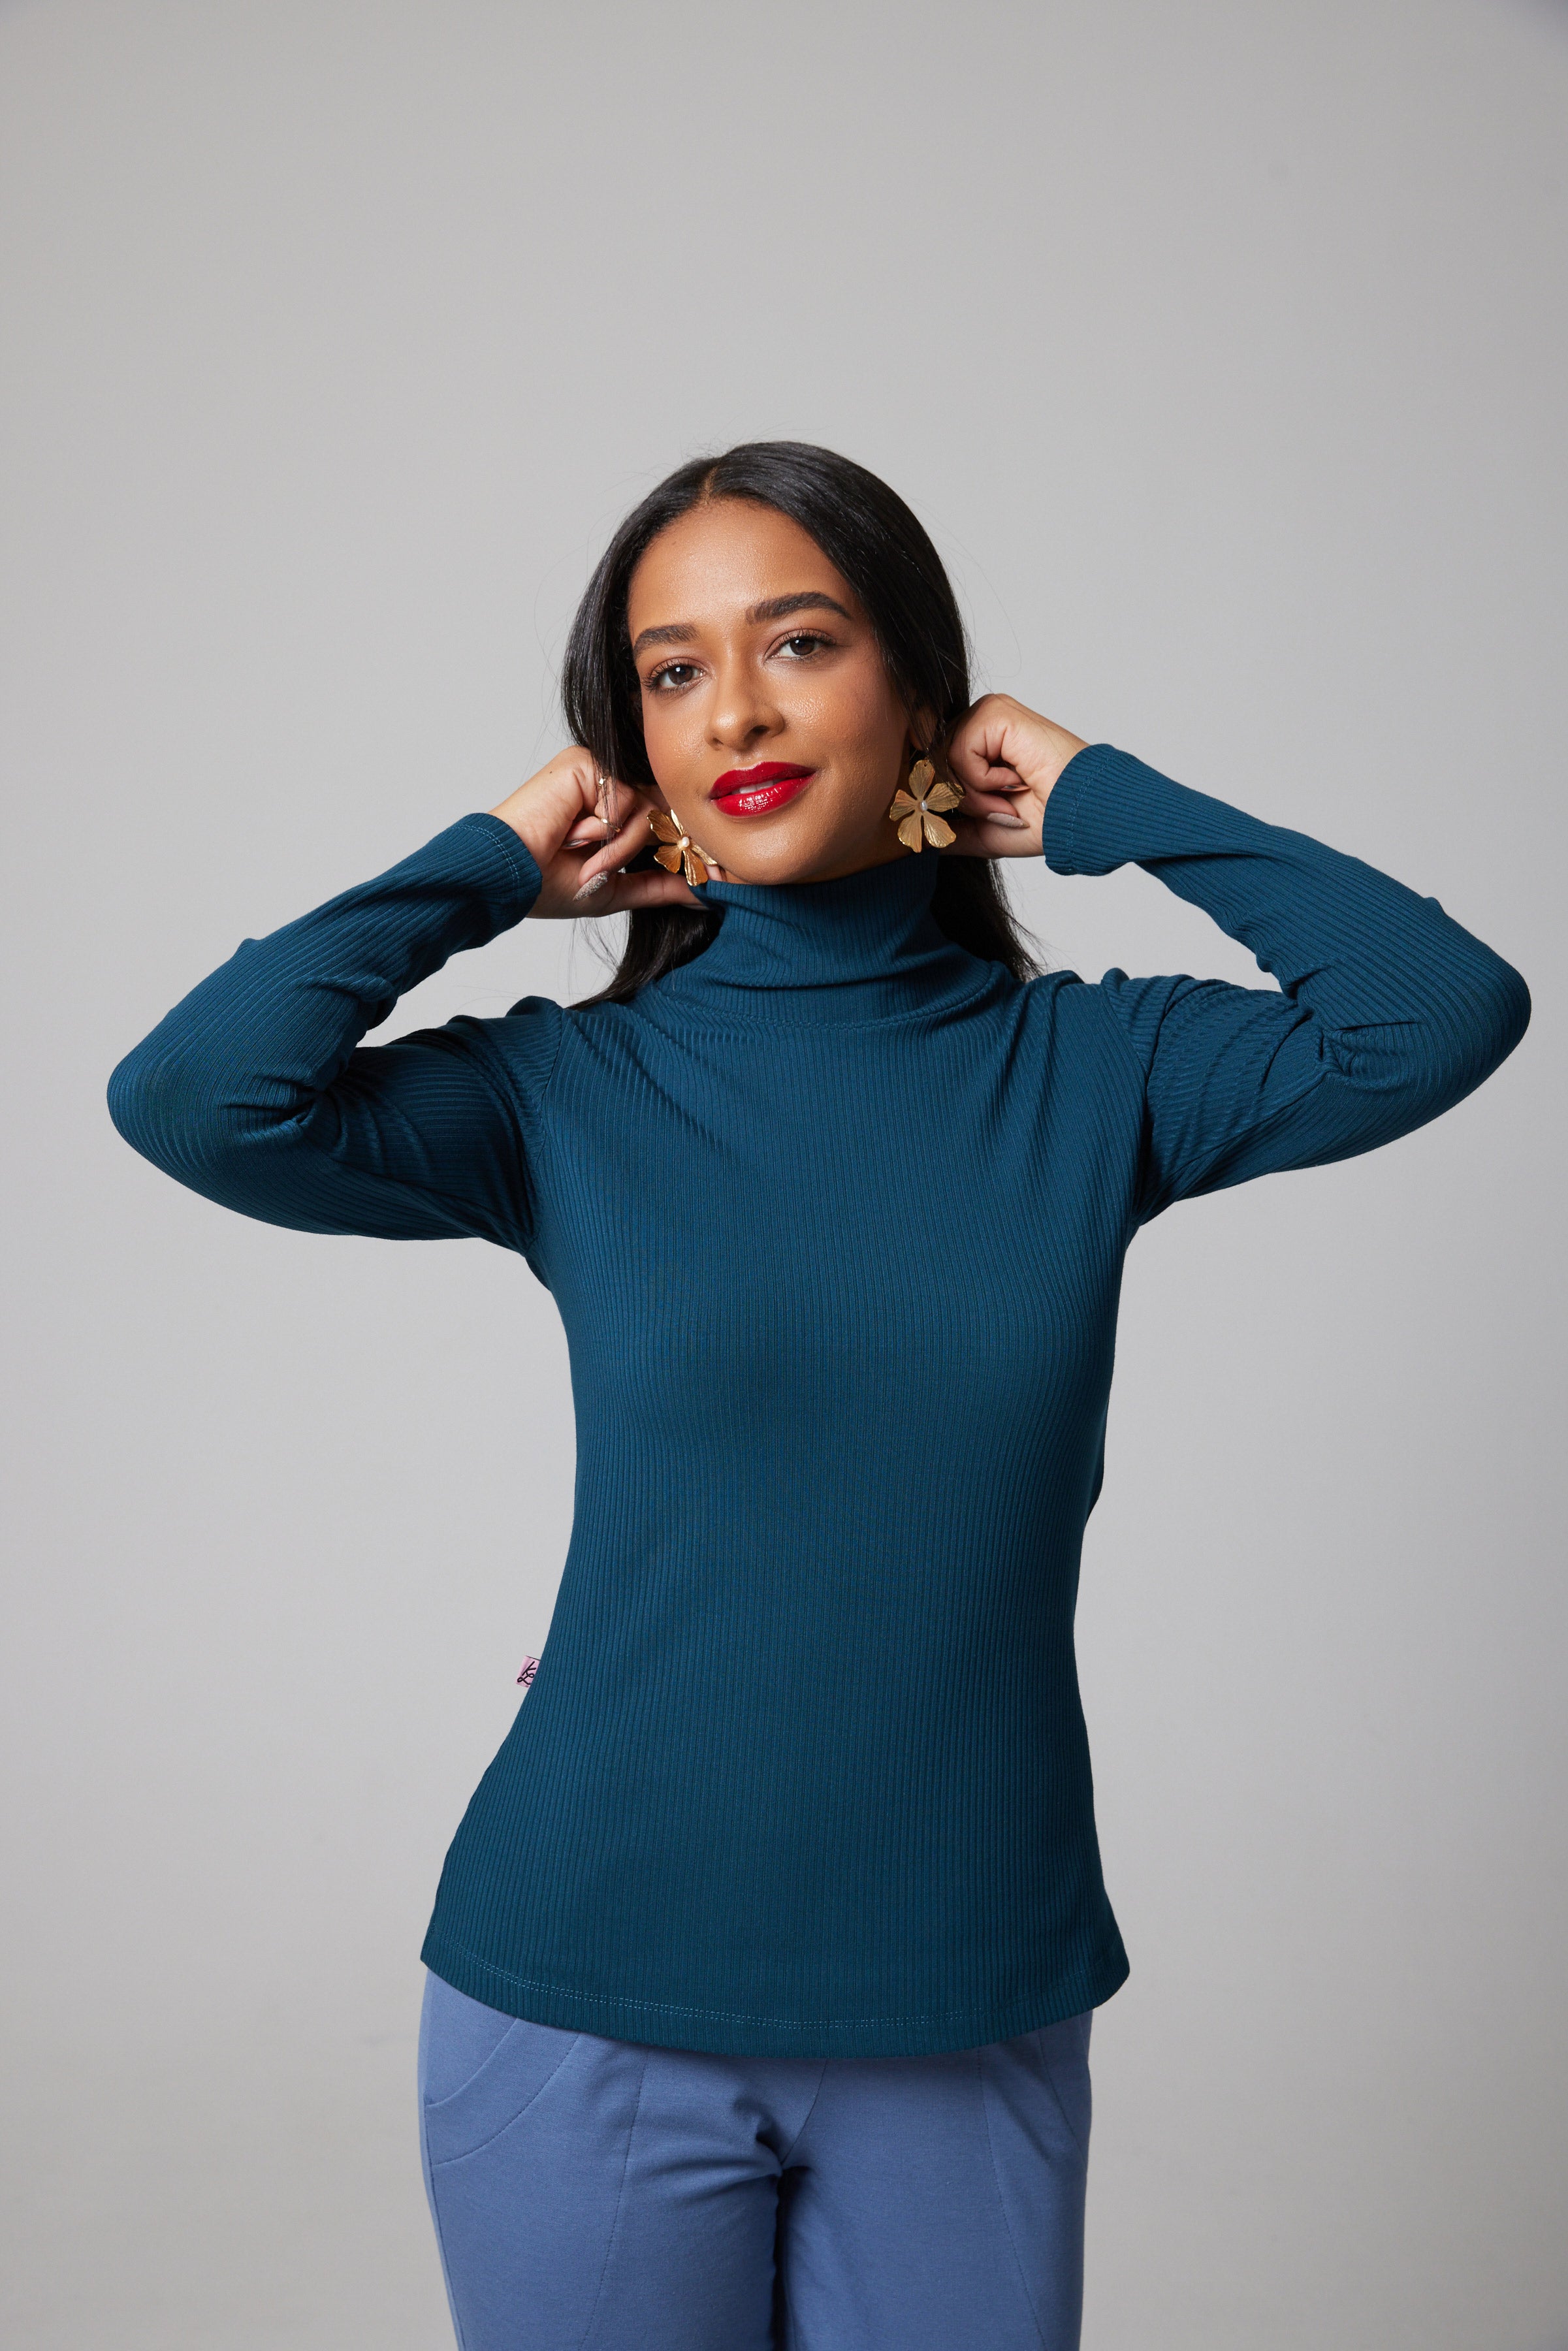 Ribbed Perfect Turtleneck - Teal